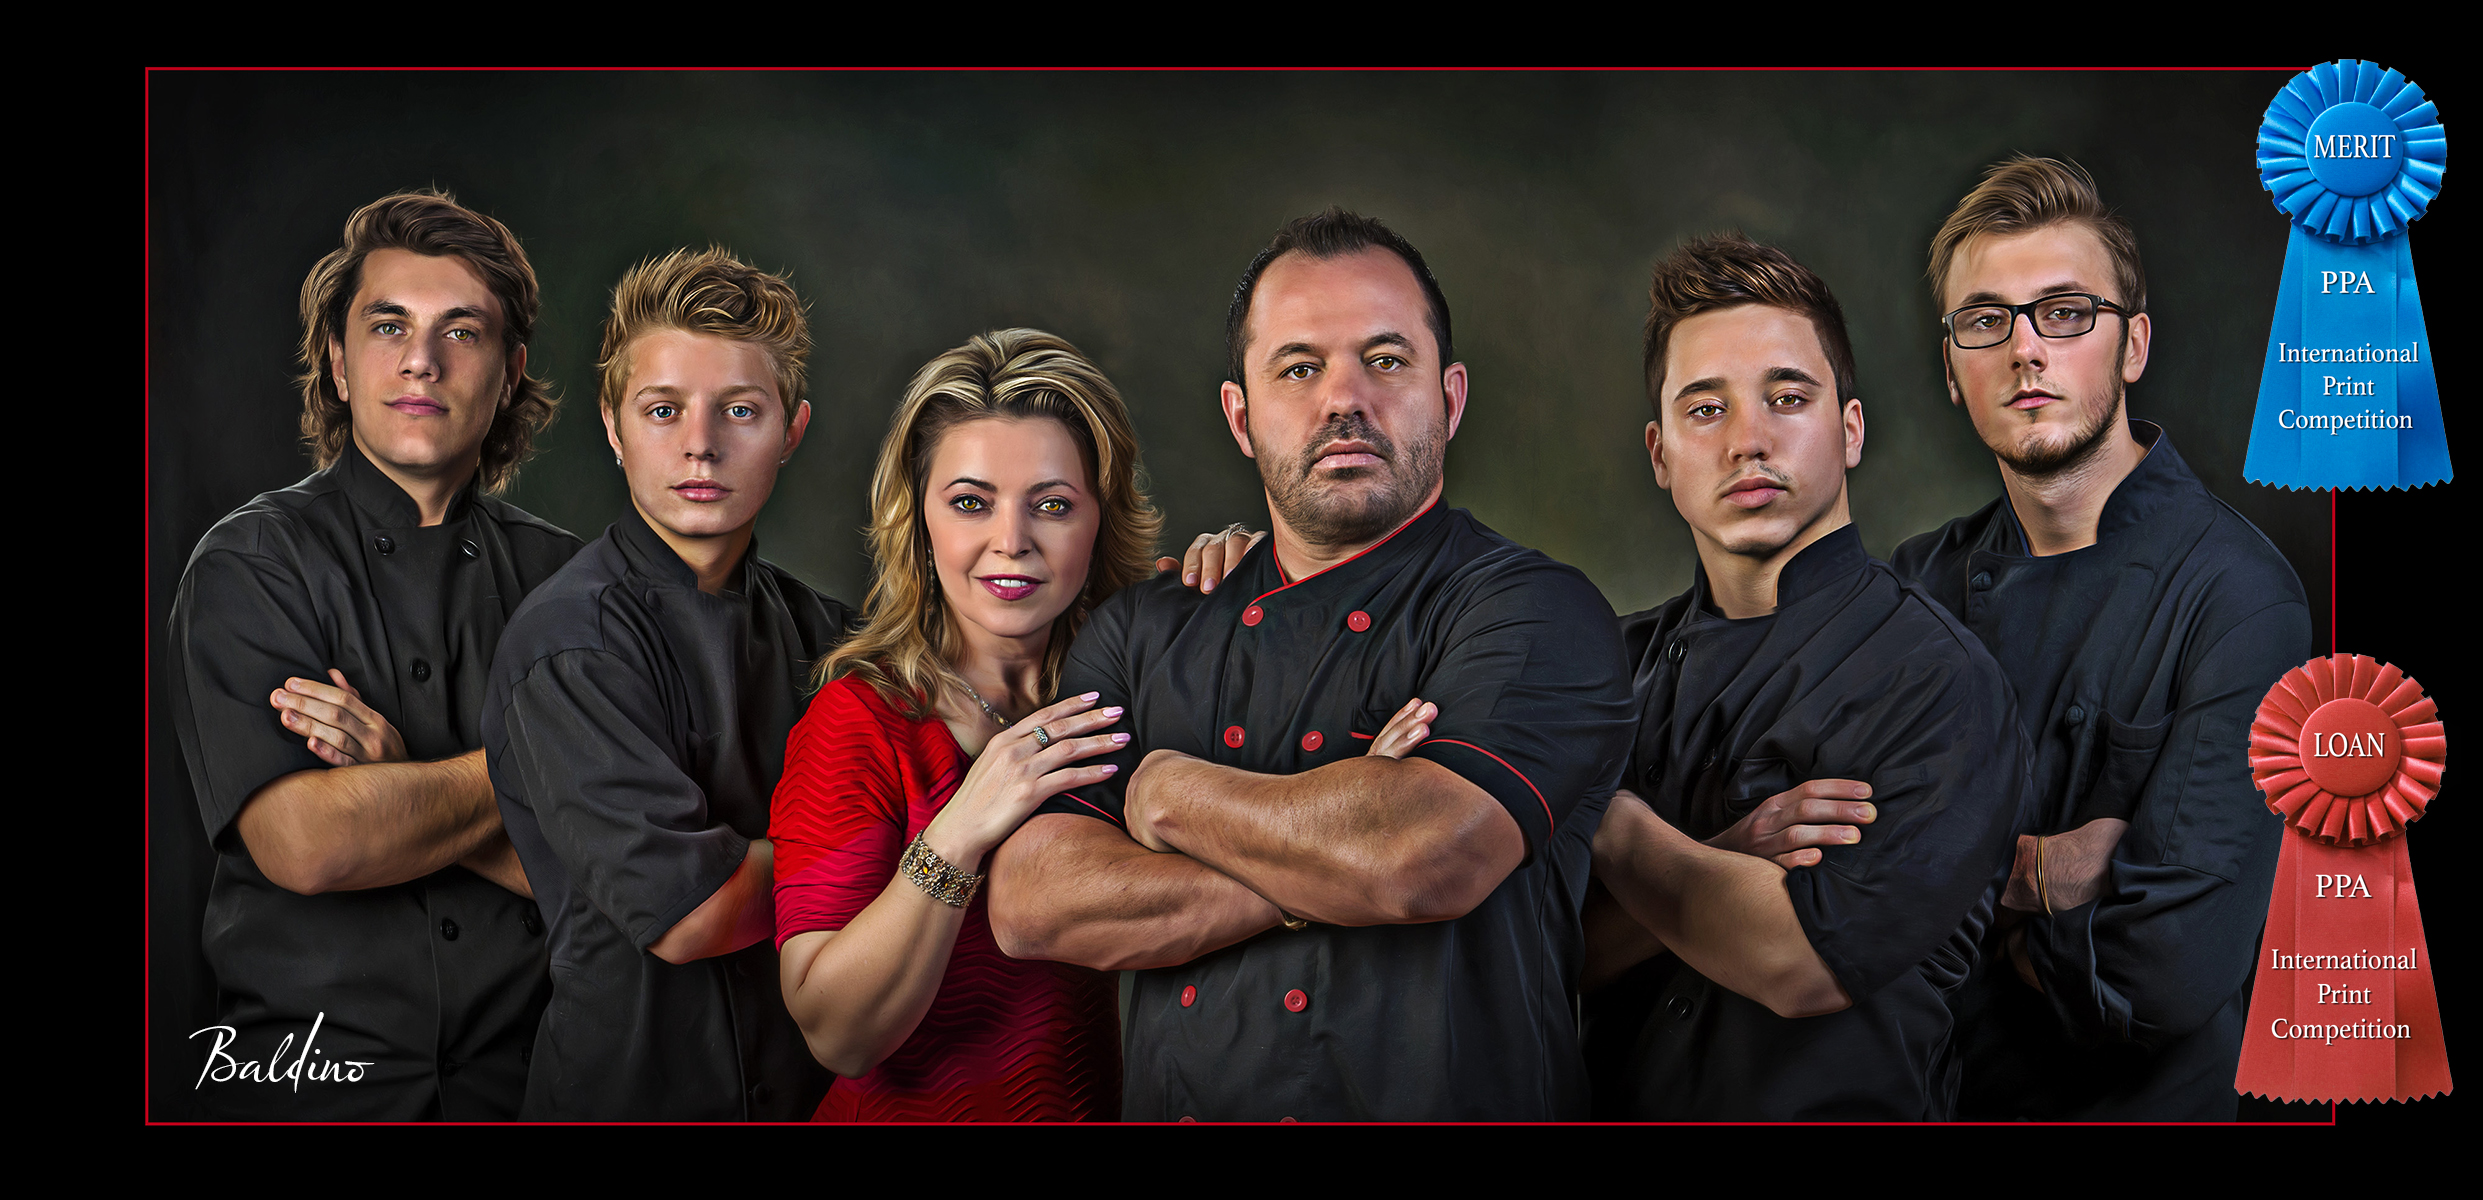 This_is_ a_ photograph_taken_to_be_a_portrait_of_five_men_and_a_woman. They_are_a_family_that_owns_a_restaurant. The_woman_is_not_a_chef. The_man_in_the_center_is_the_chef.